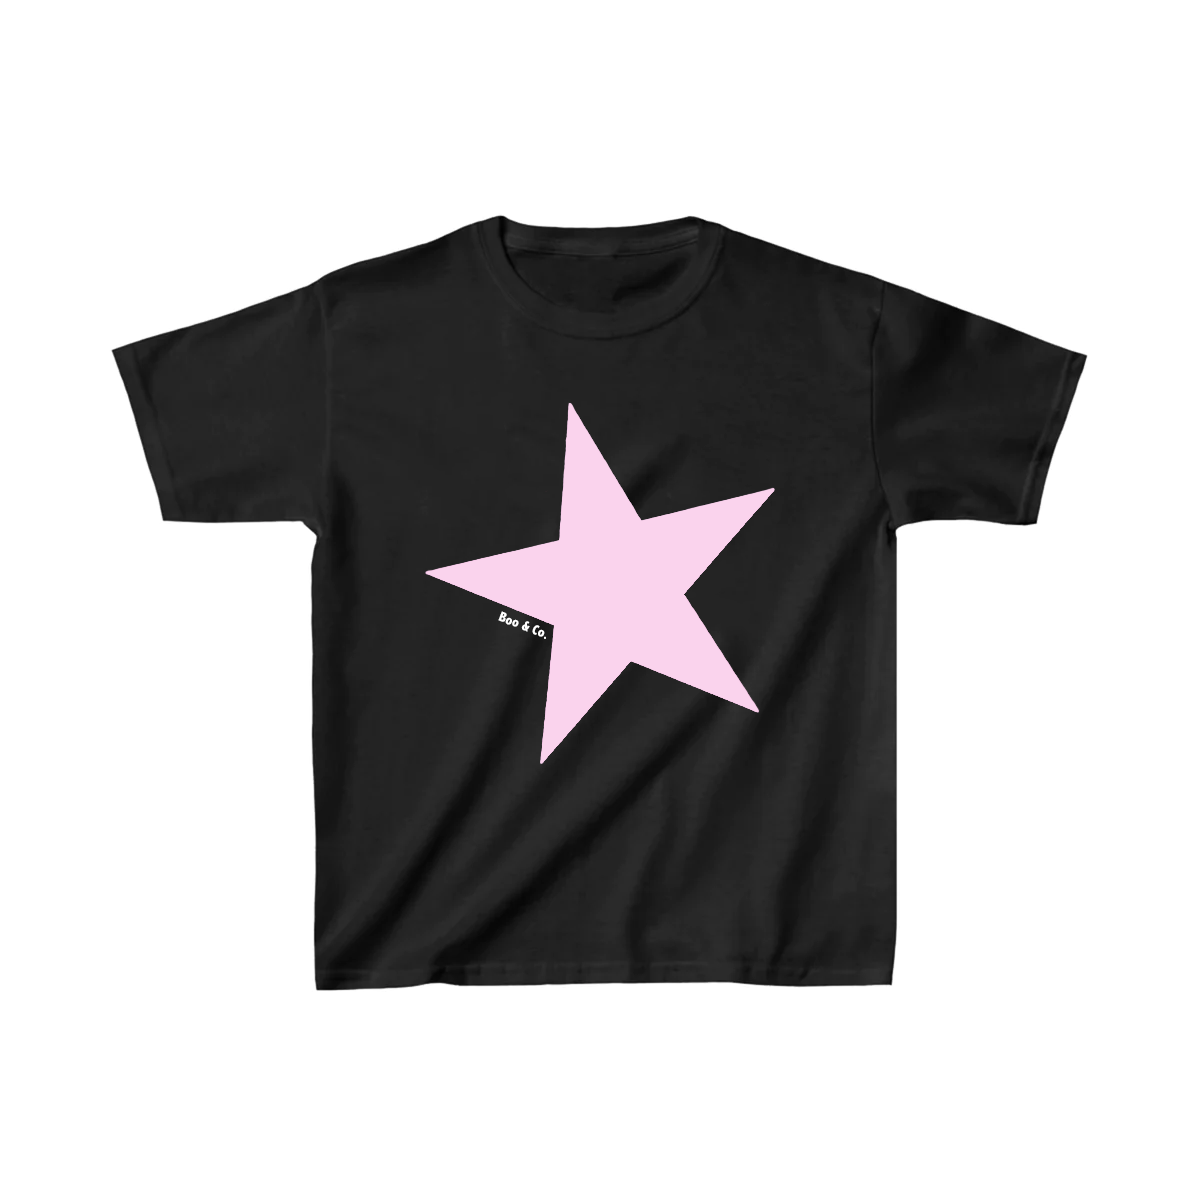 All-Star Short-Fit Tee